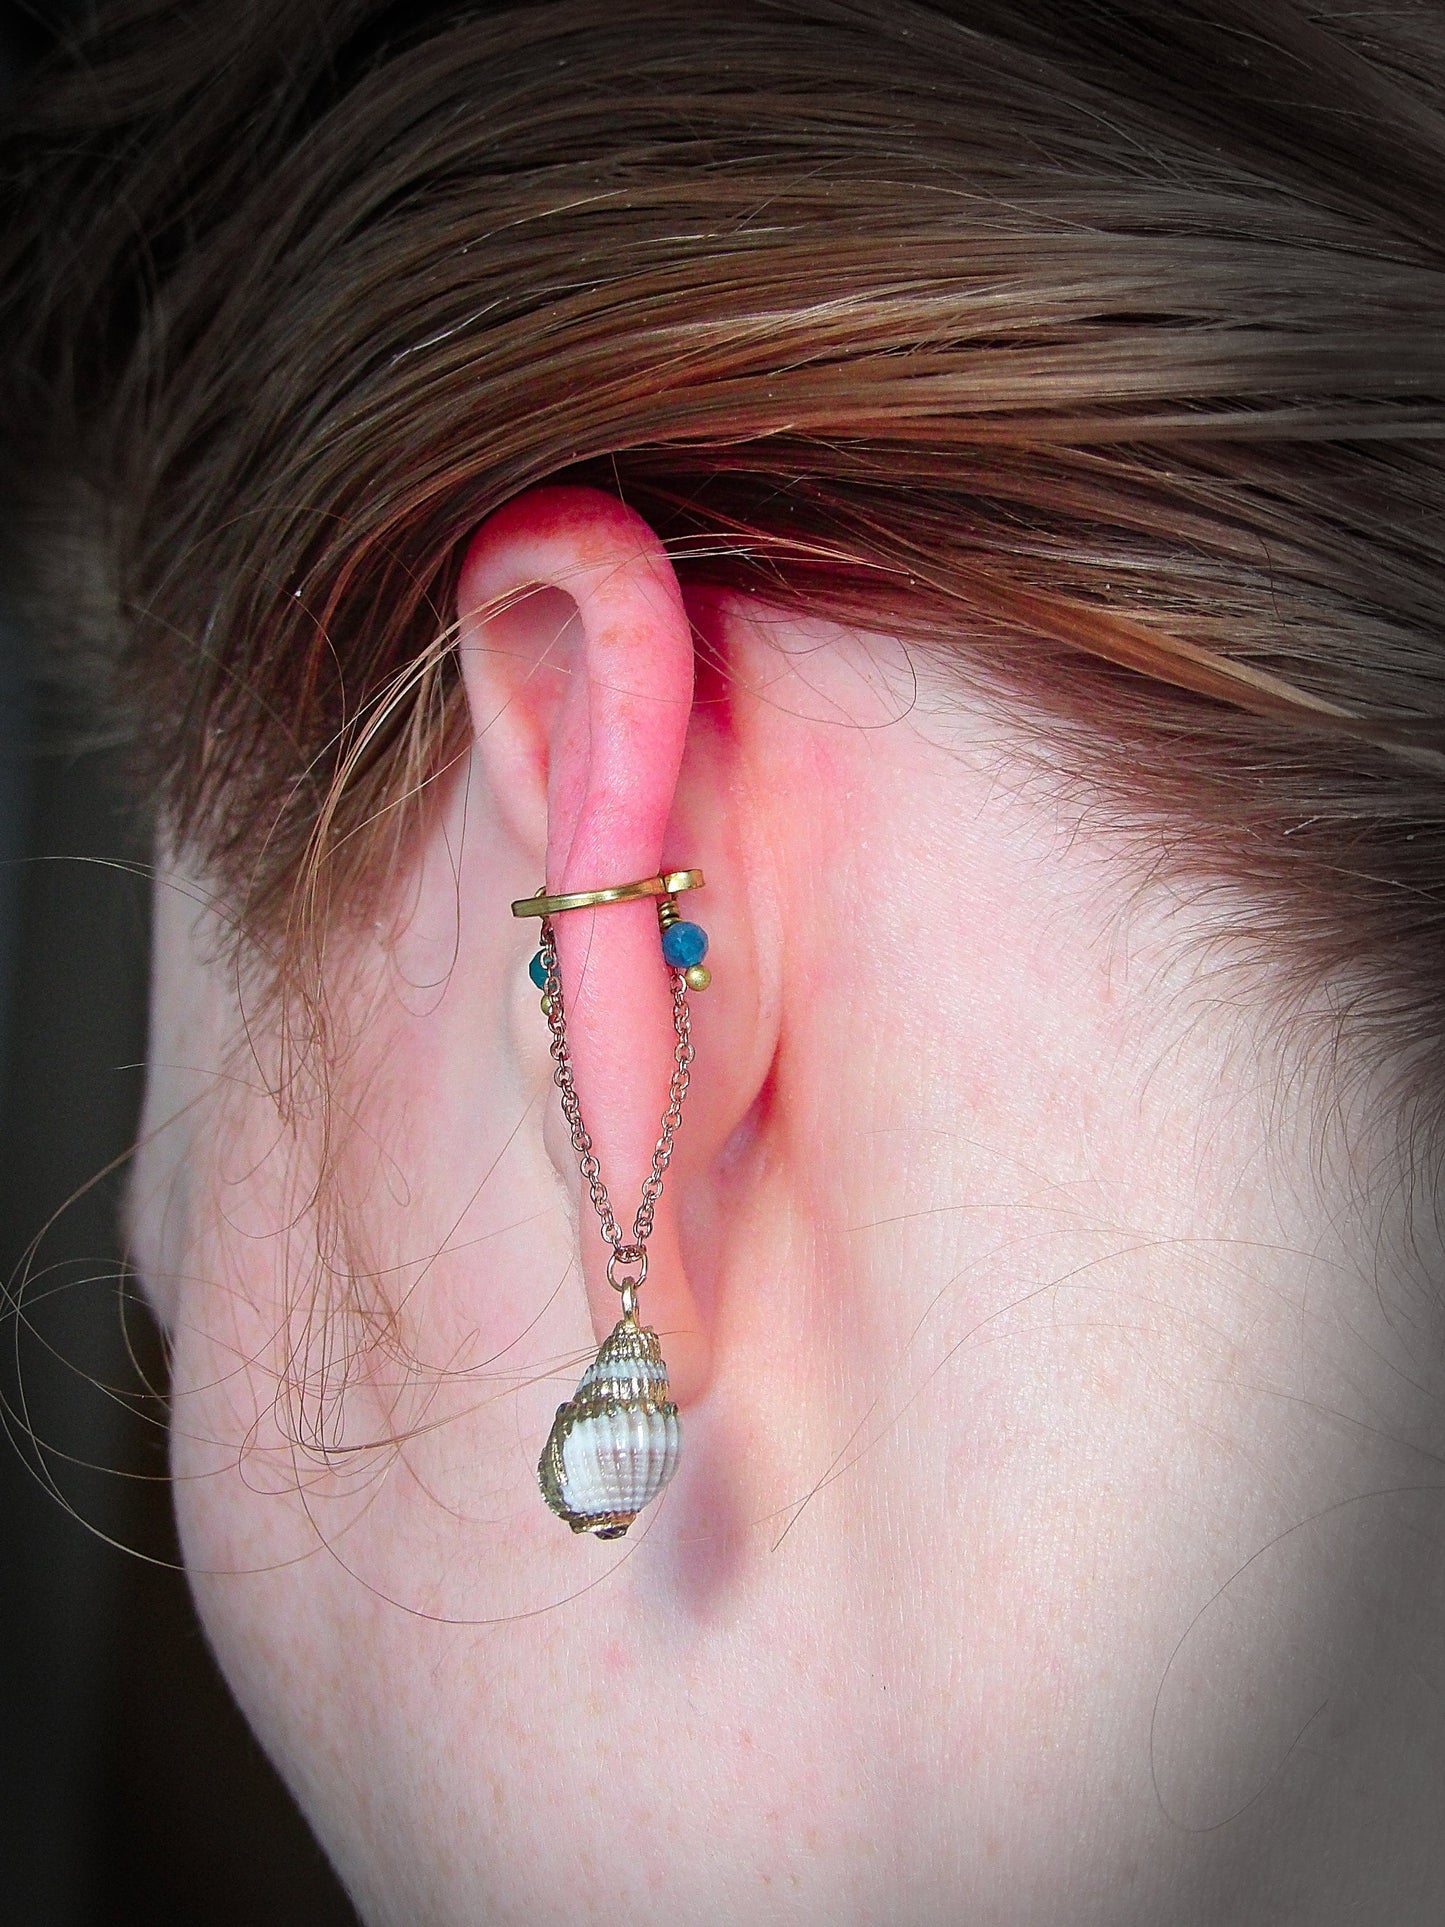 ethically sourced blue apatite ear cuff with sea shell